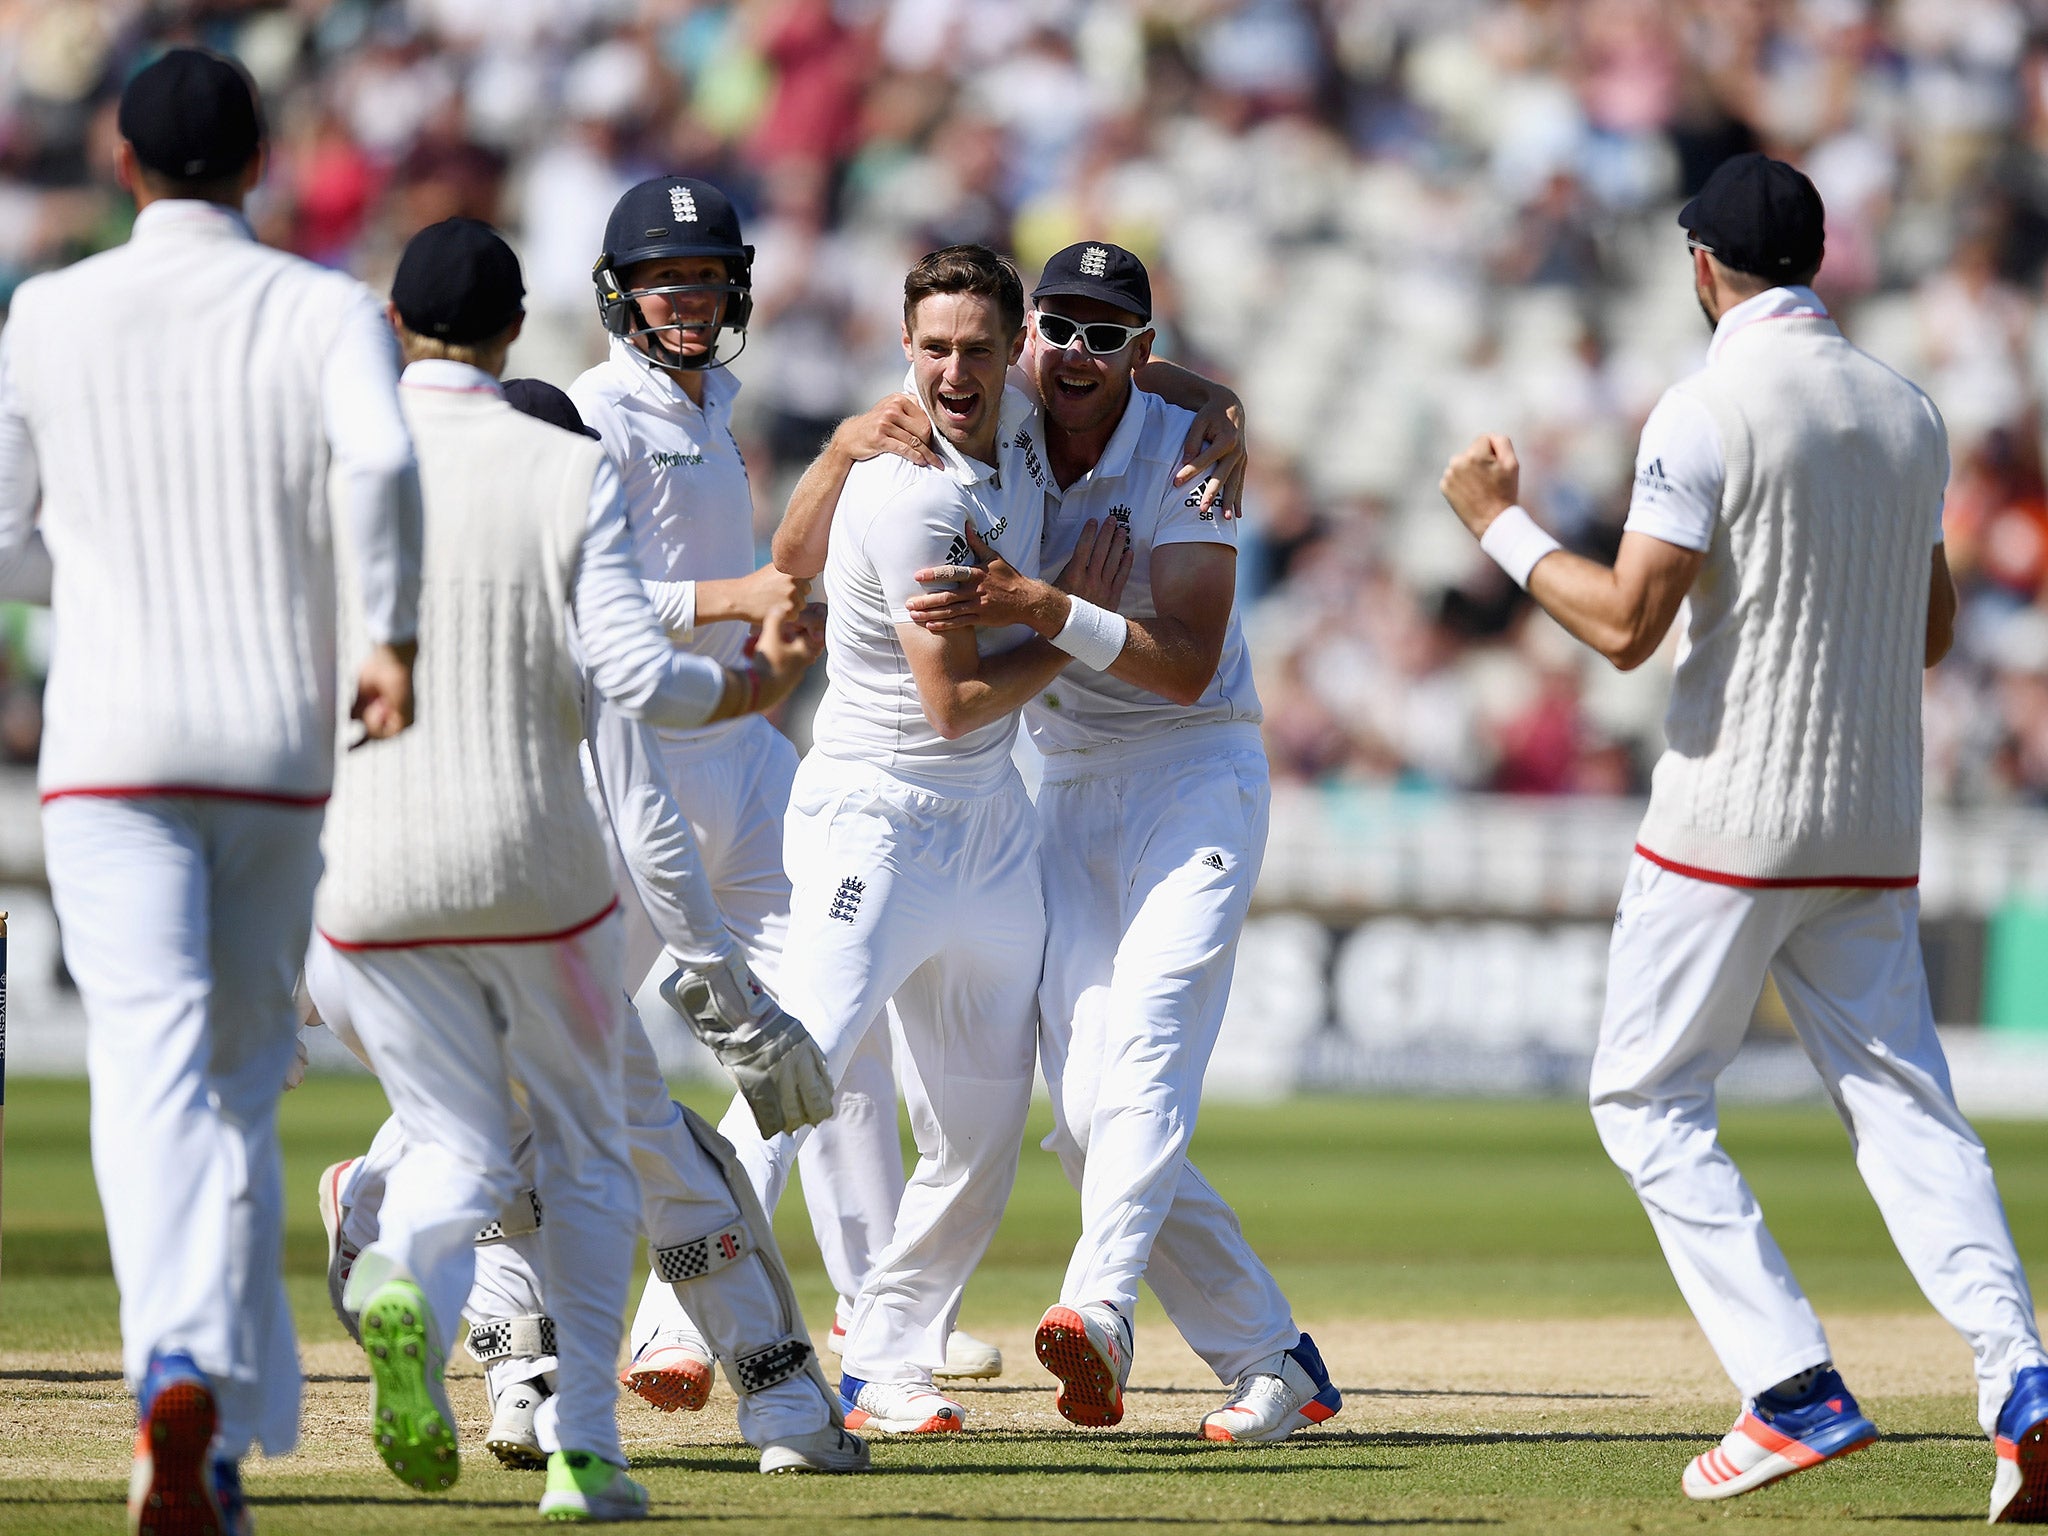 Chris Woakes celebrates after taking a wicket on the final day of the Test against Pakistan